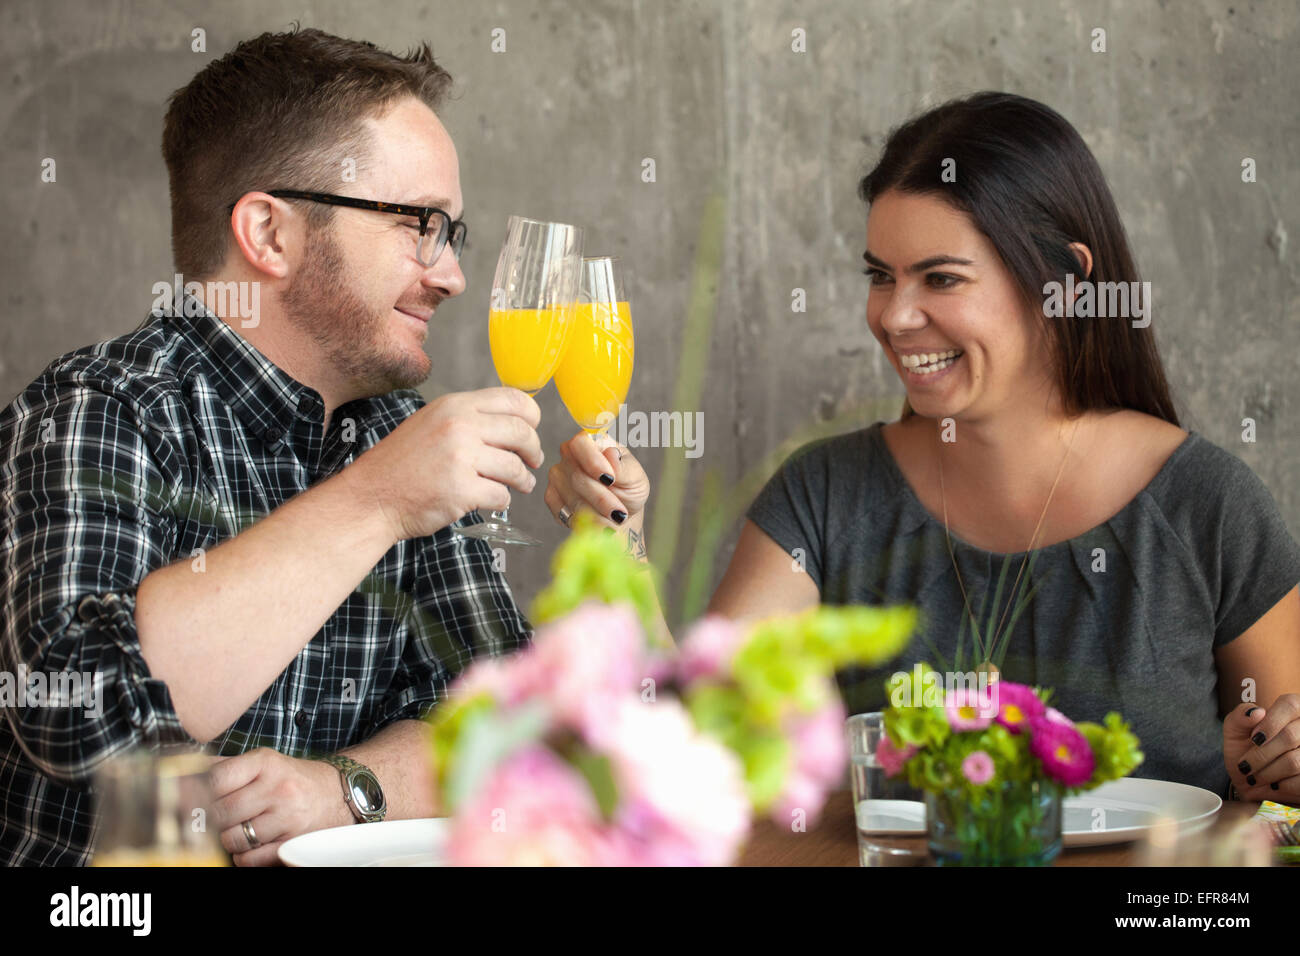 Man and woman clinking glasses Stock Photo